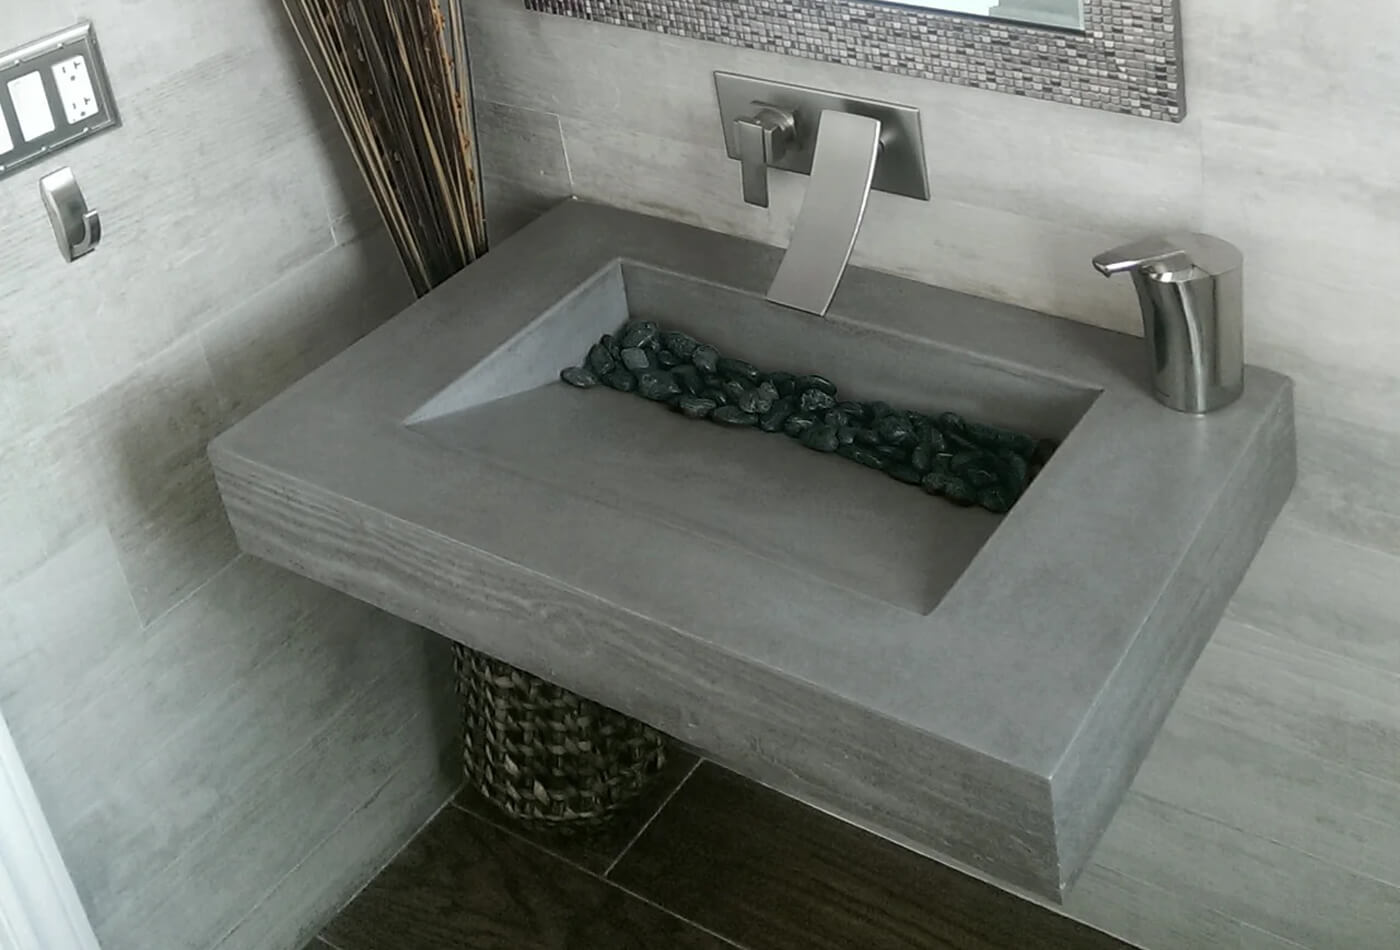 What Are The Benefits Of Ramp Sink